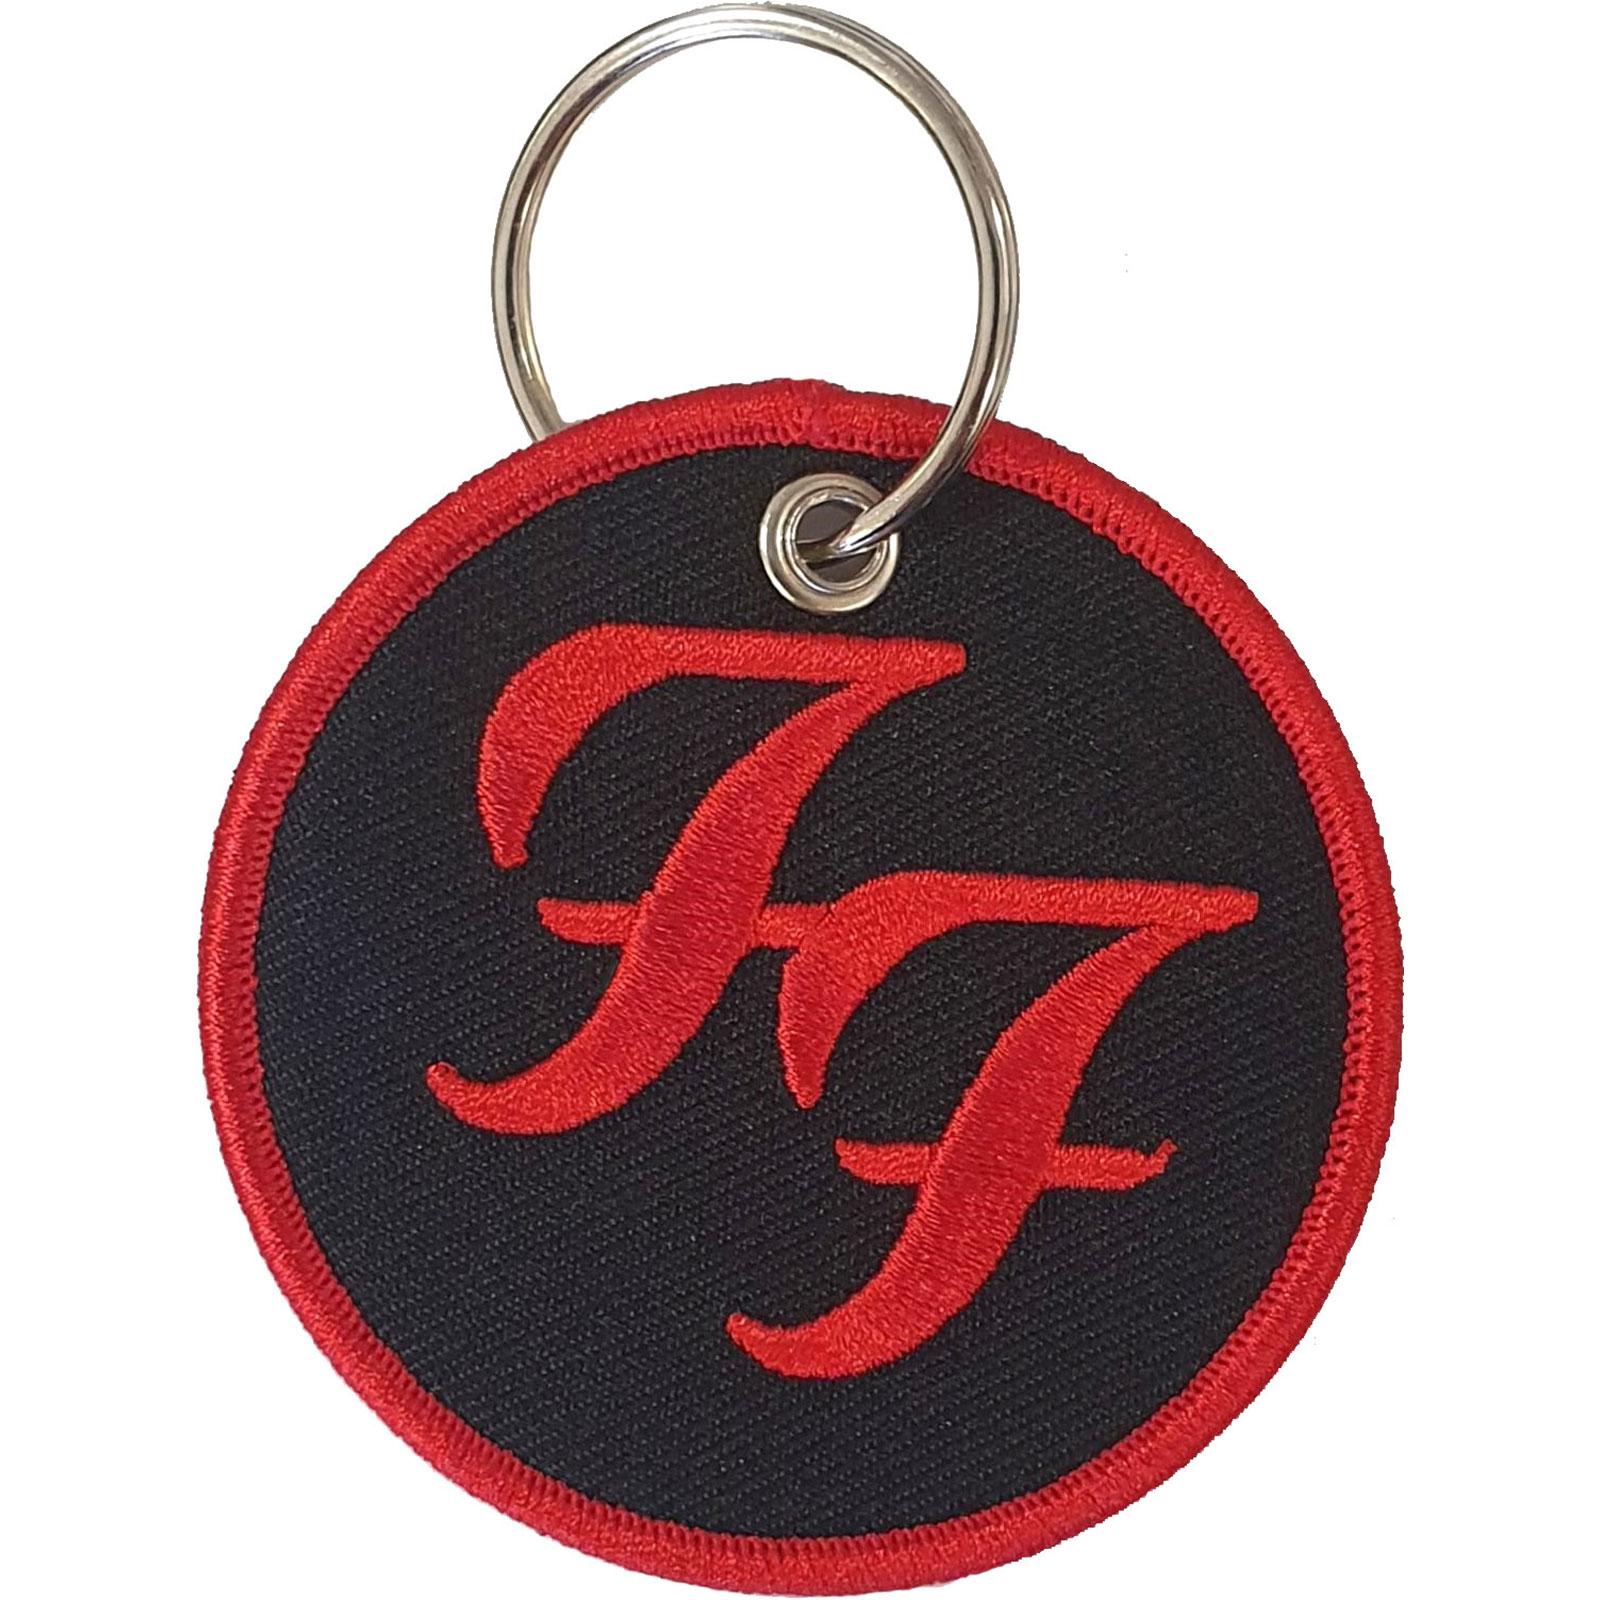 Selected image for Privezak Foofighters Circle Woven Patch